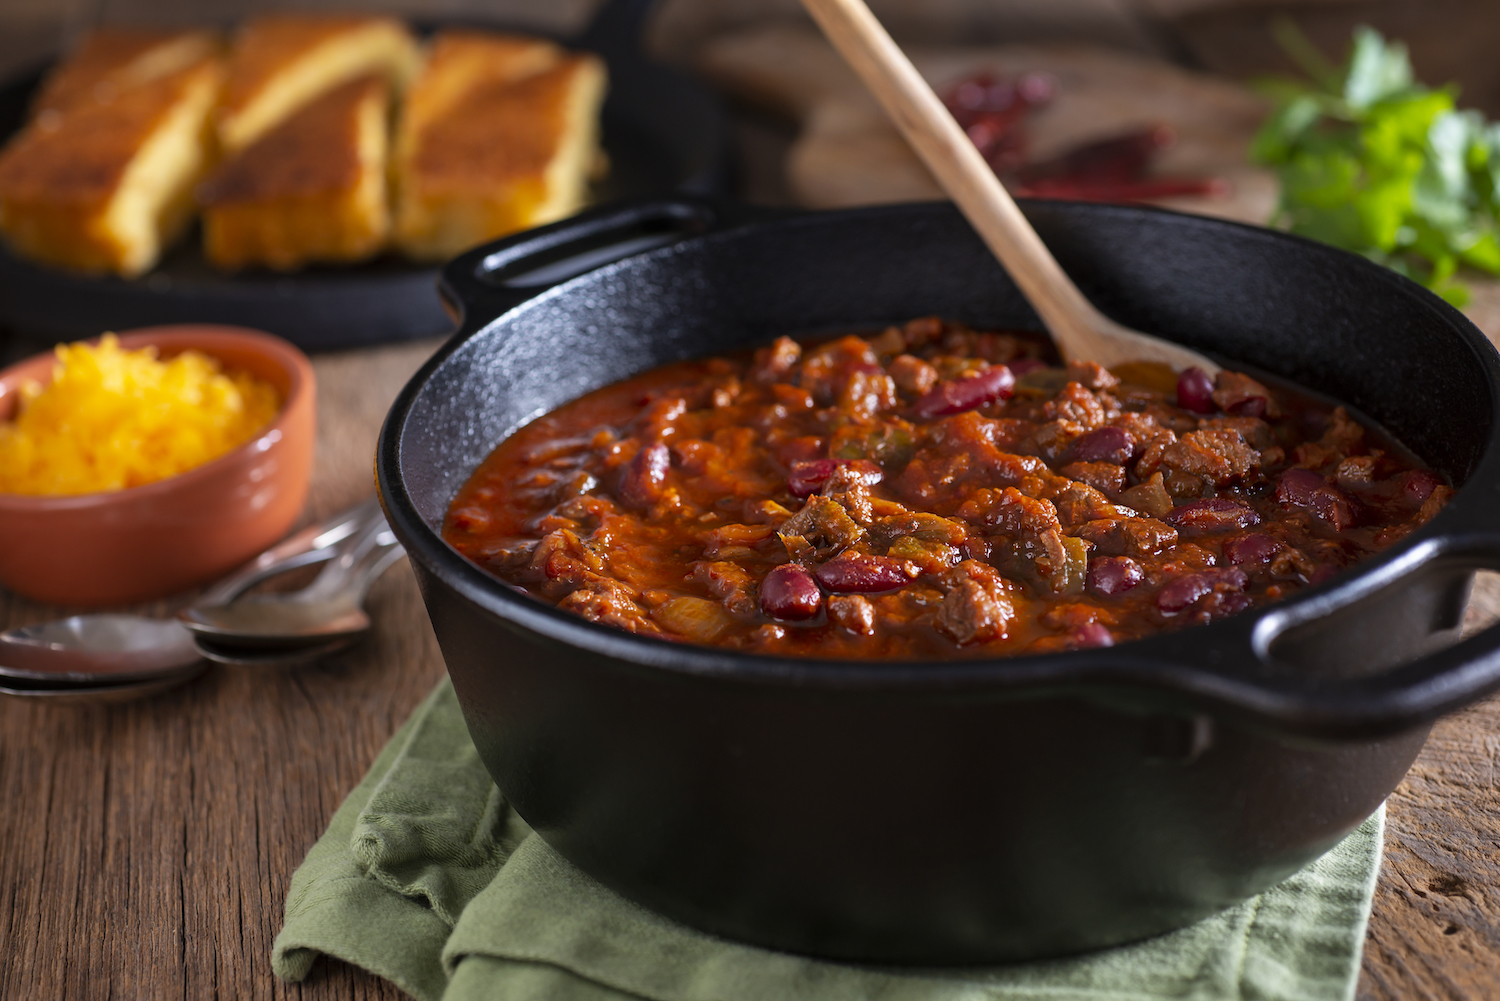 Classic Southwestern Chili in a Cast Iron Dutch Oven with Corn Bread and Cheddar Cheese